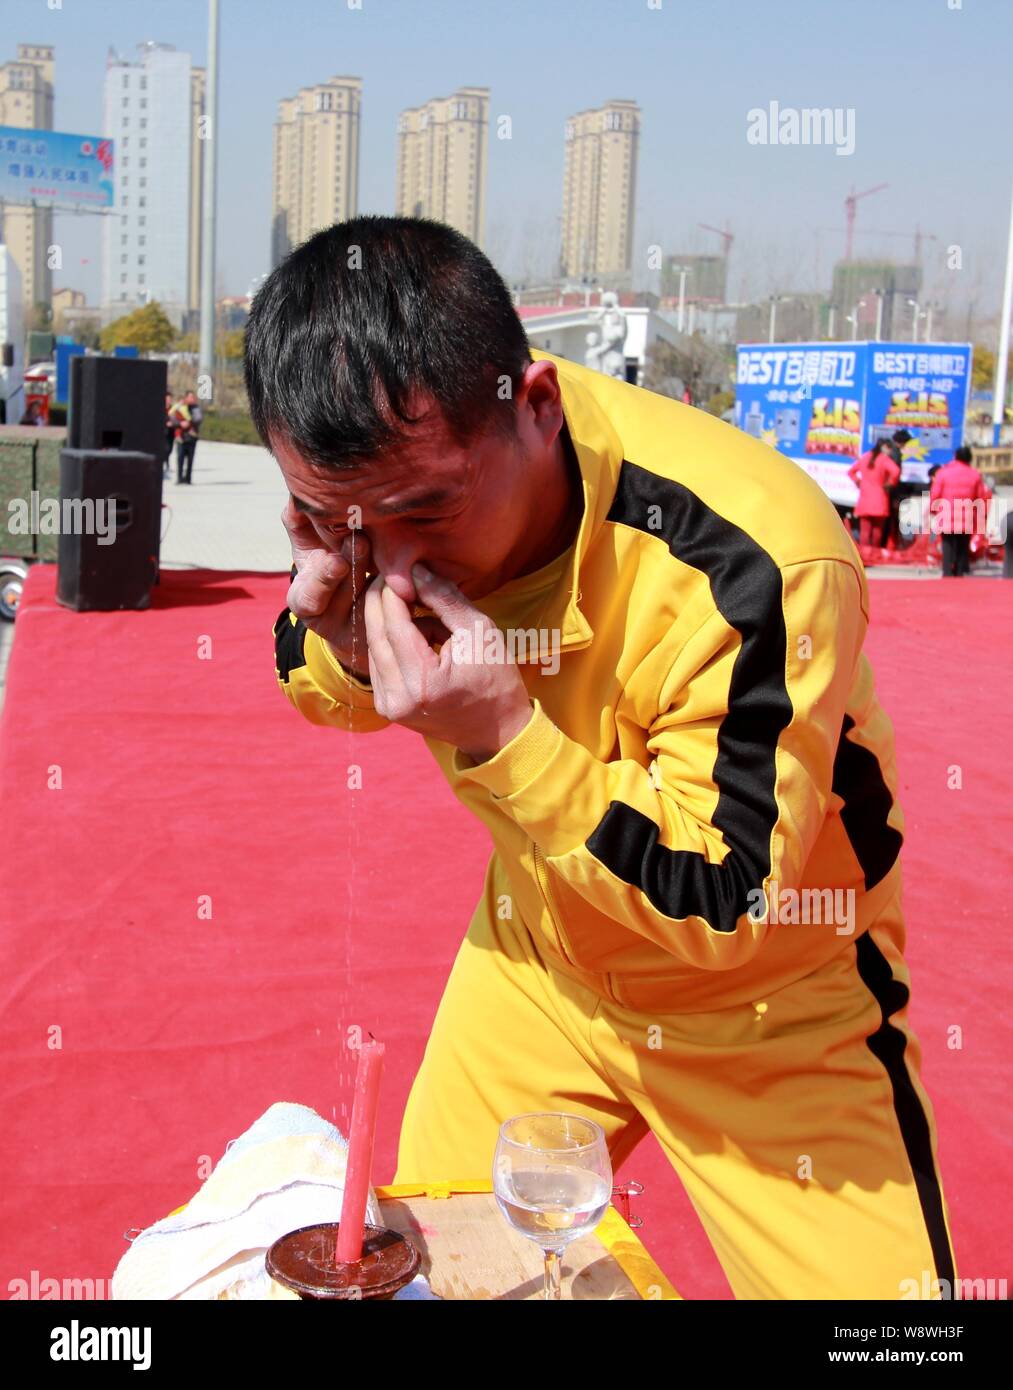 Zhang Yilong, a Chinese stunt performer dressed as Hong Kong action film star Bruce Lee, squirts water out of his right eye to put out a candle during Stock Photo